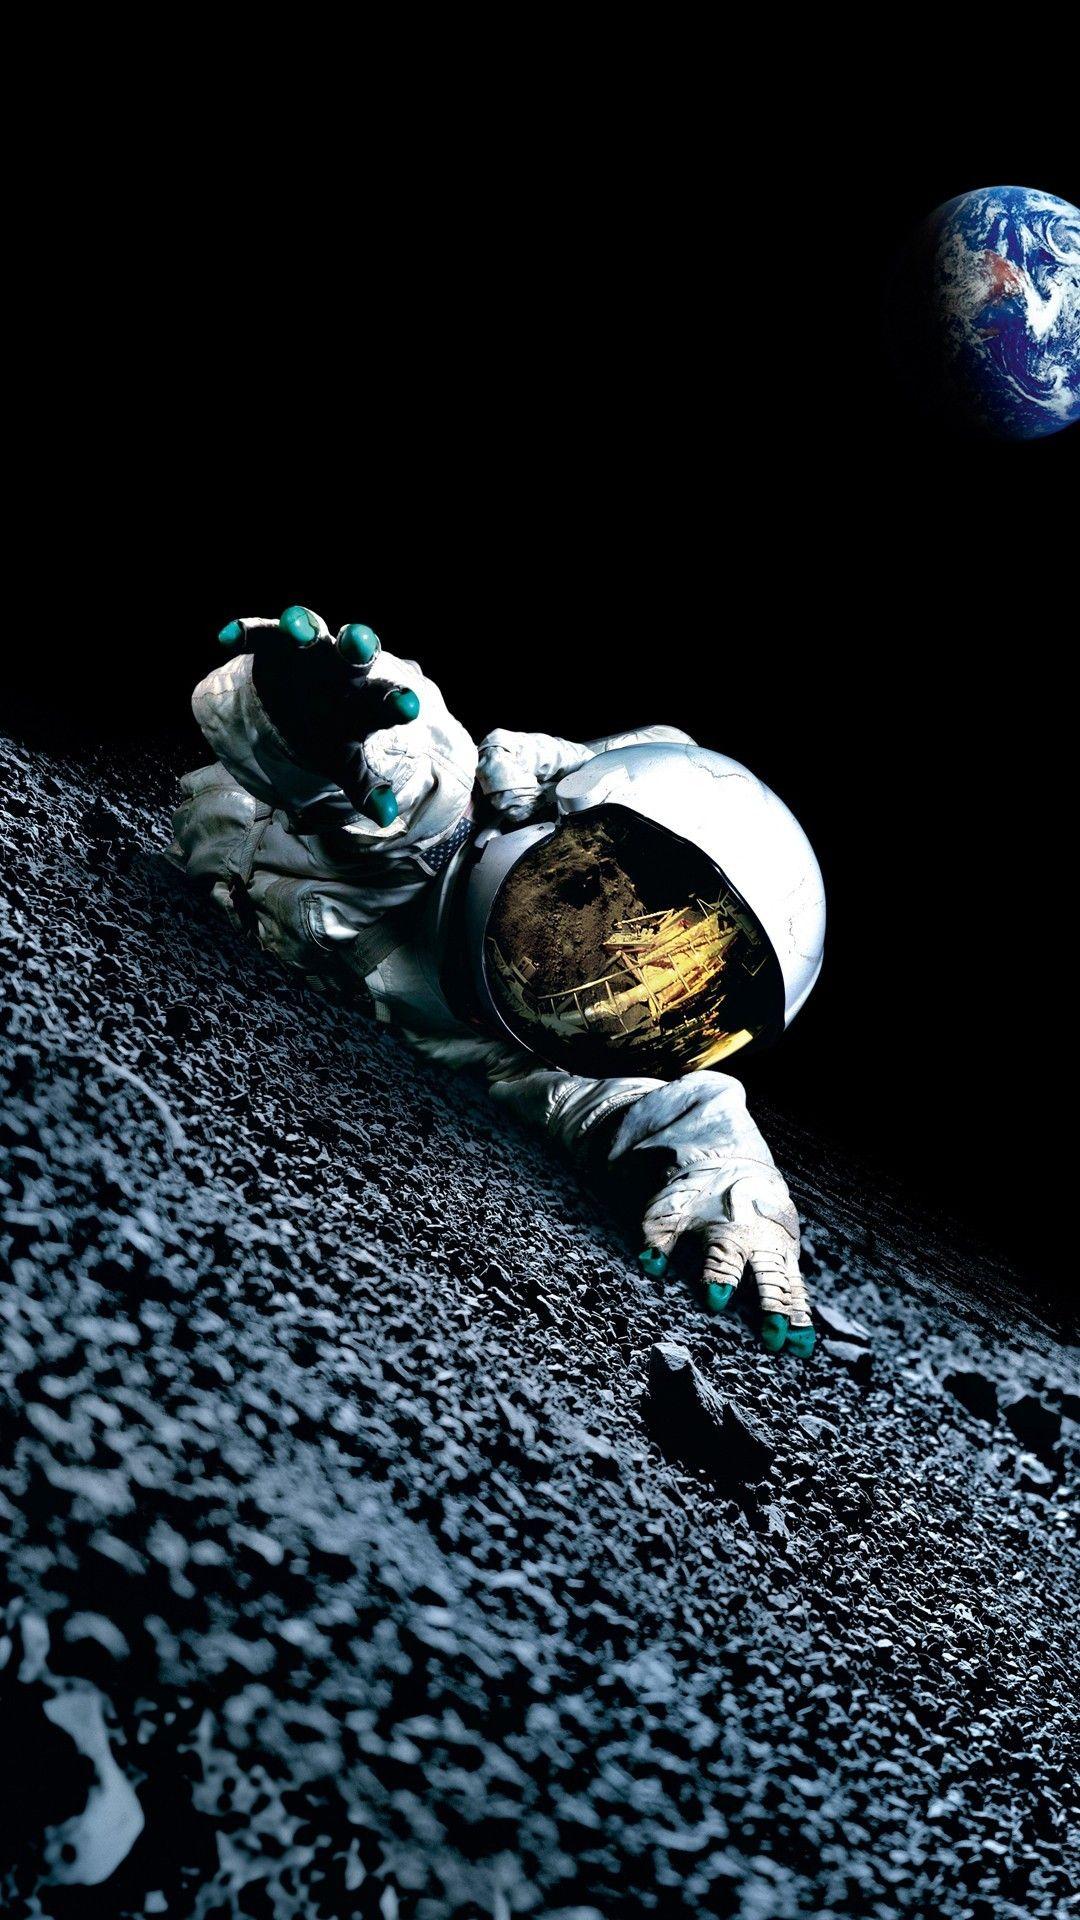 Apollo 18 htc one wallpaper, free and easy to download. Astronaut wallpaper, Wallpaper space, Galaxy wallpaper